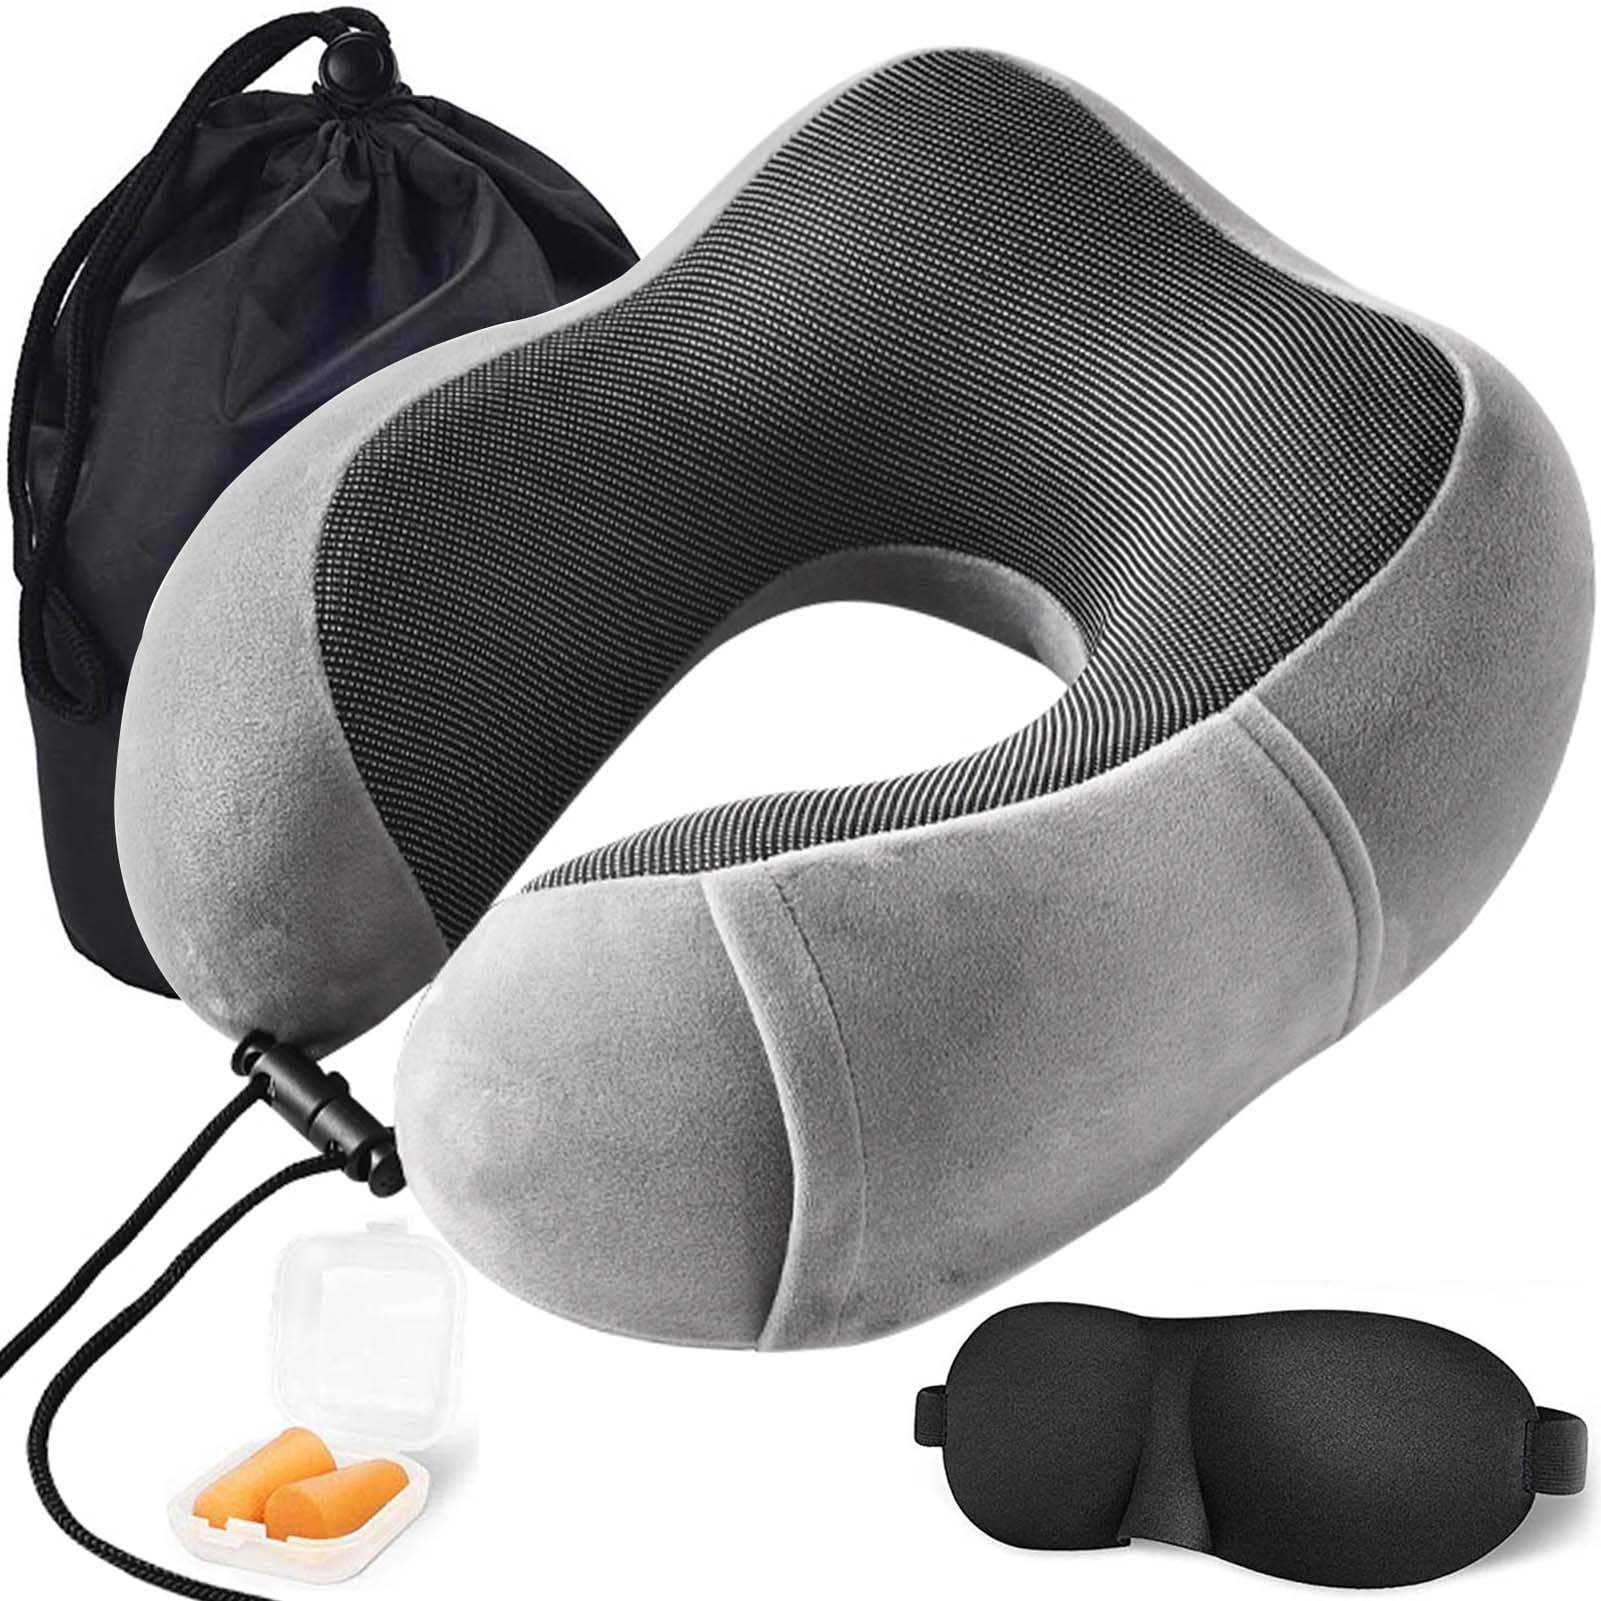 Earplugs The Best Portable Memory Foam Travel Neck Pillows for Airplanes,Comfortable and Breathable Fabric,Train,Bus or Car Travel Kit with 3D Contoured Eye Masks and Luxury Bag,Machine Washable